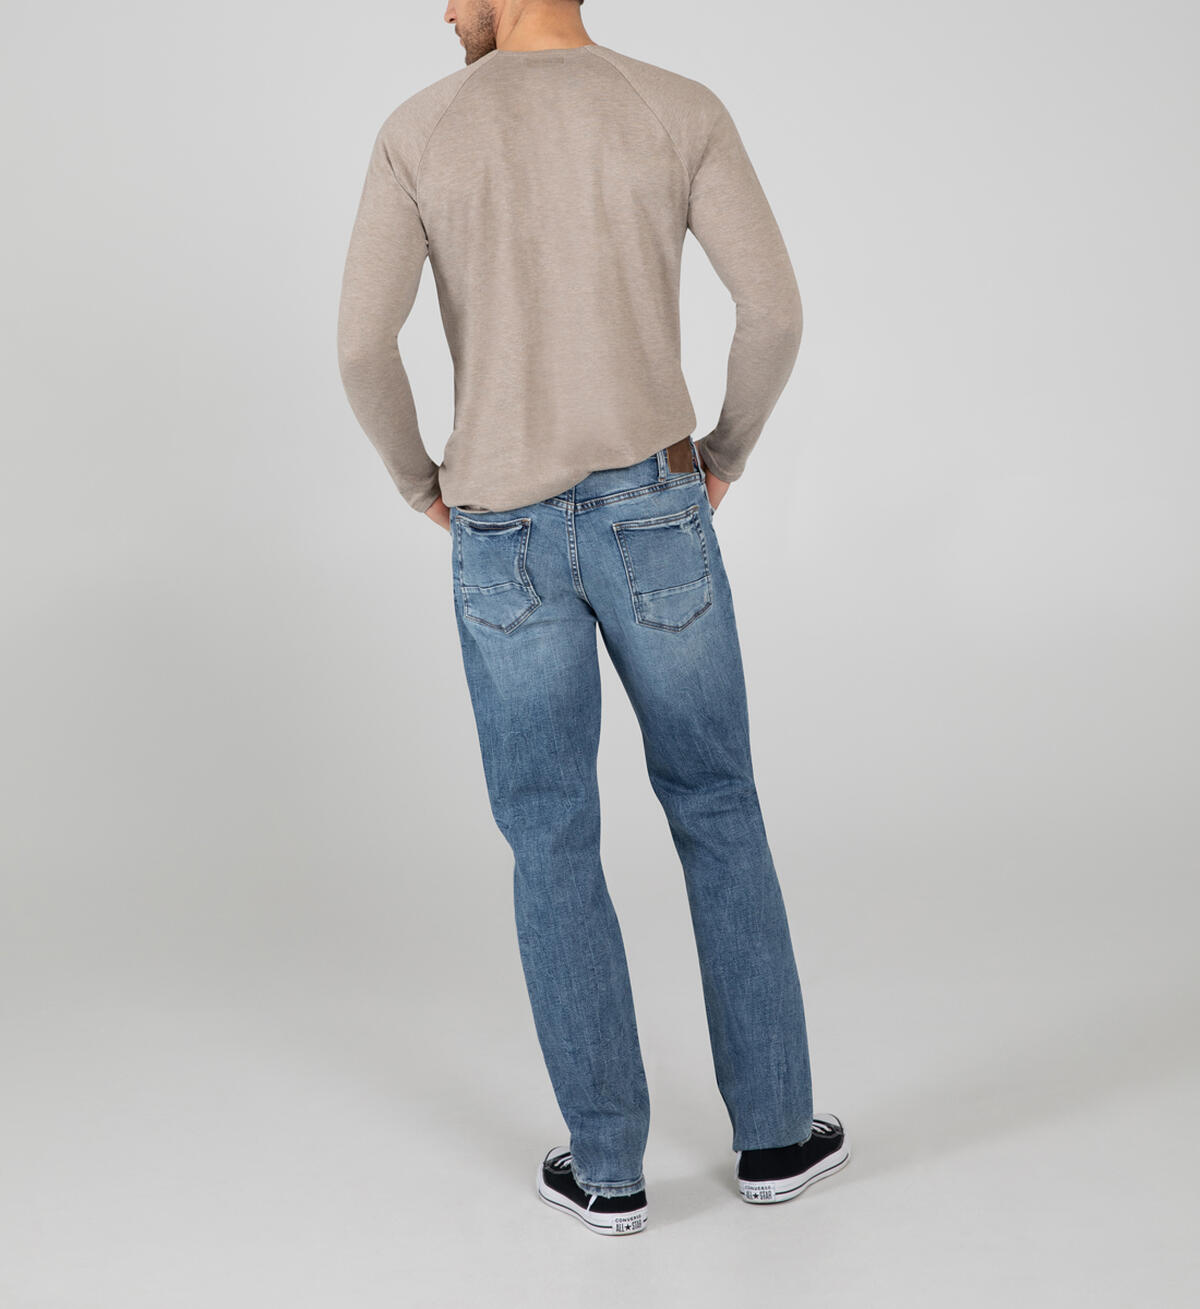 Machray Classic Fit Straight Leg Jeans Big & Tall, , hi-res image number 1